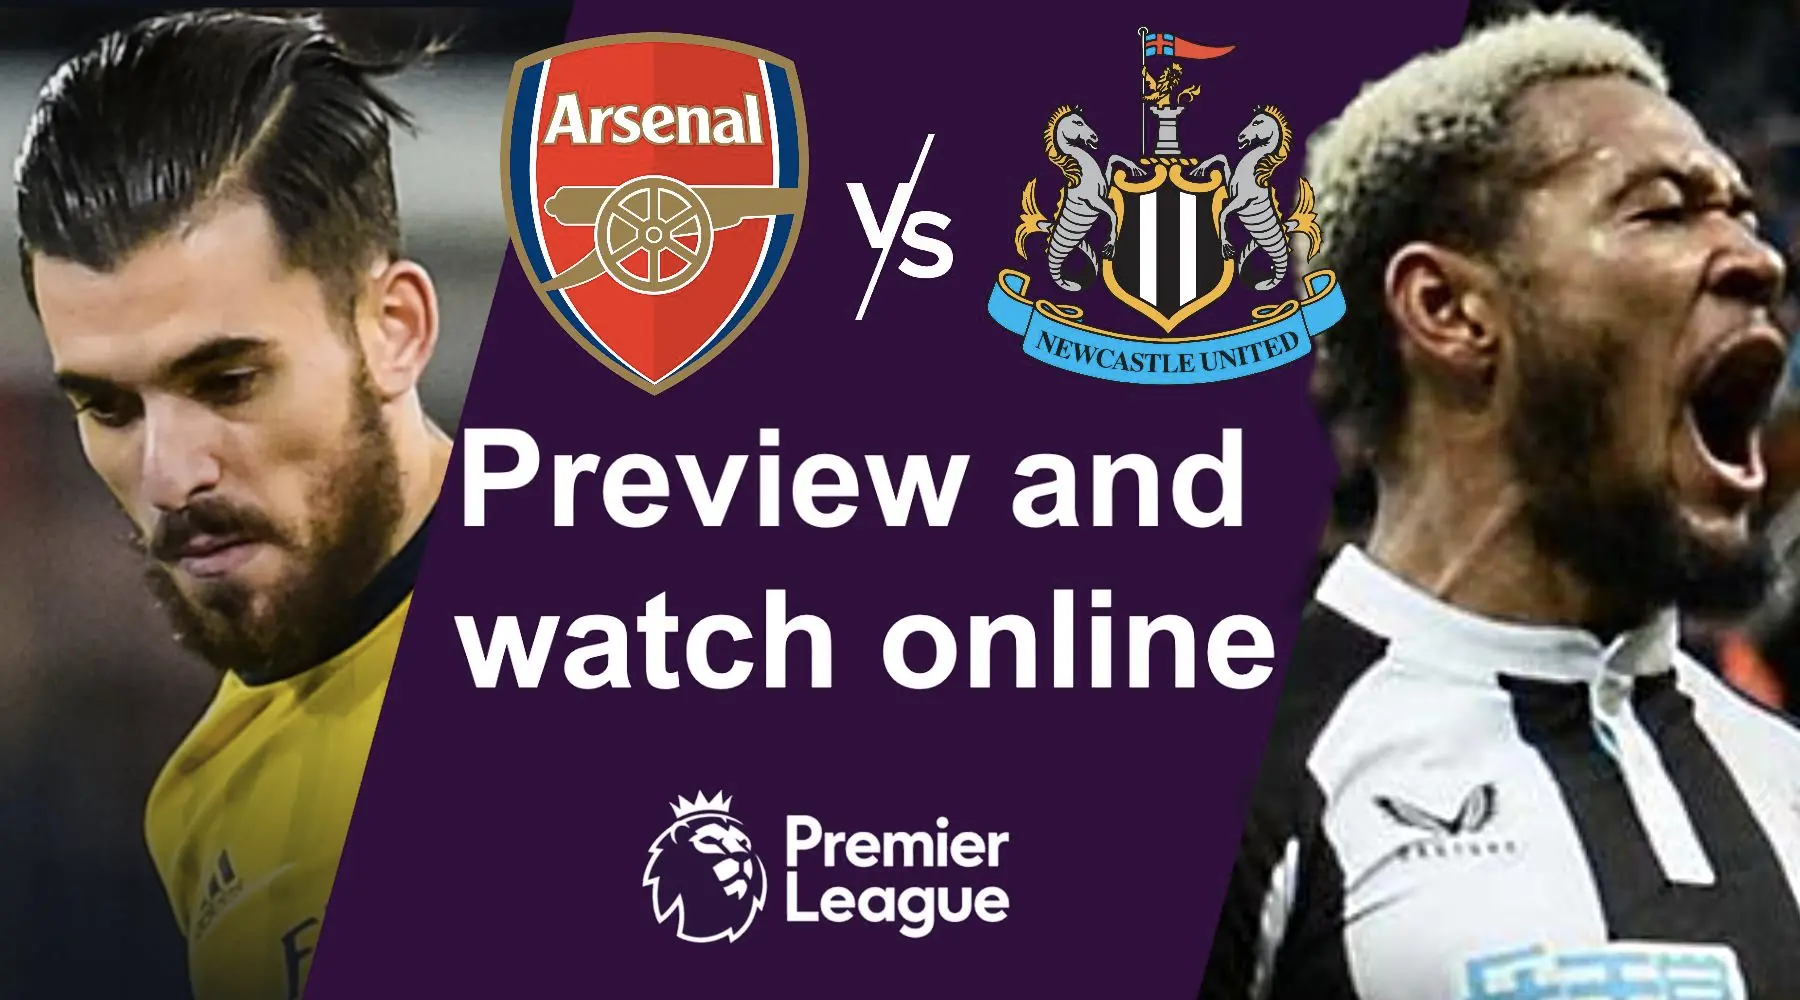 How to watch Arsenal vs Newcastle Premier League live and preview